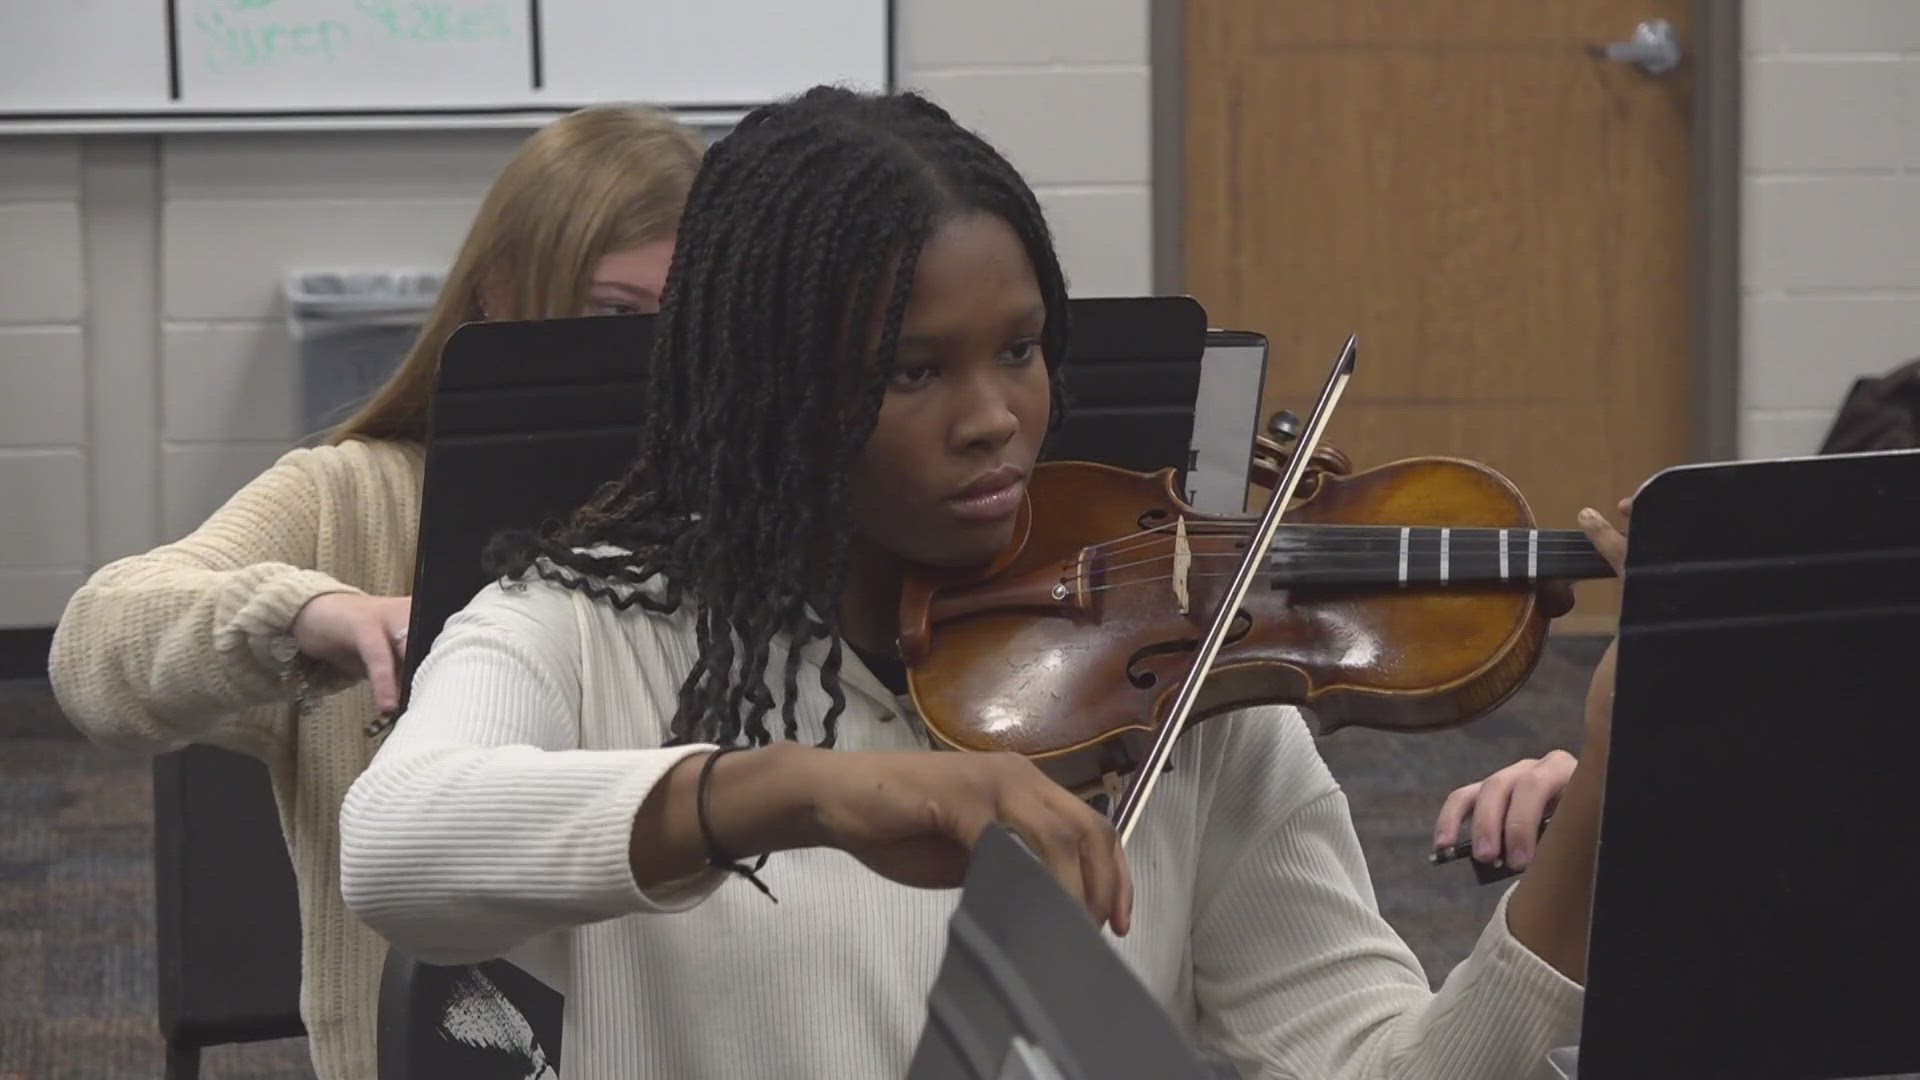 Jess Ikporo is a student athlete musician who has found success in both basketball and orchestra. The Lady Dawg is also a stellar student who welcomes challenges.